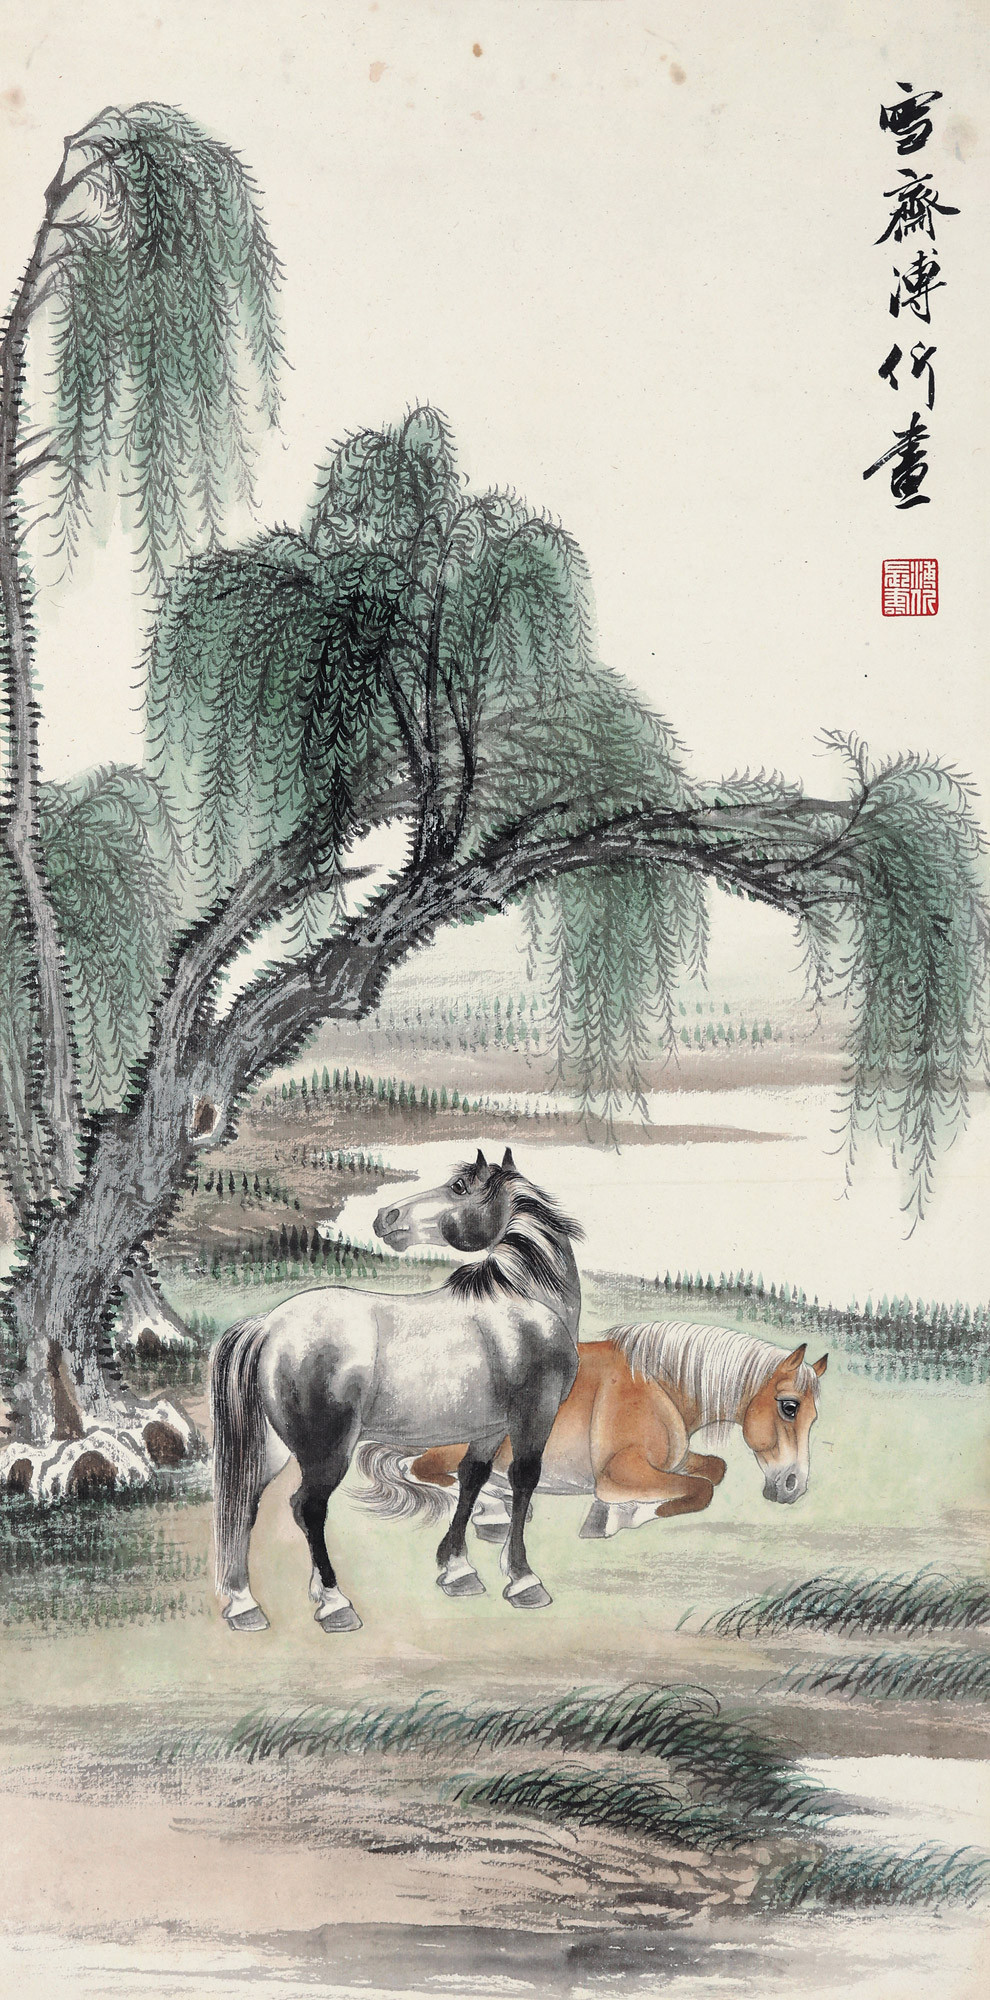 Horses Under The Willow Tree